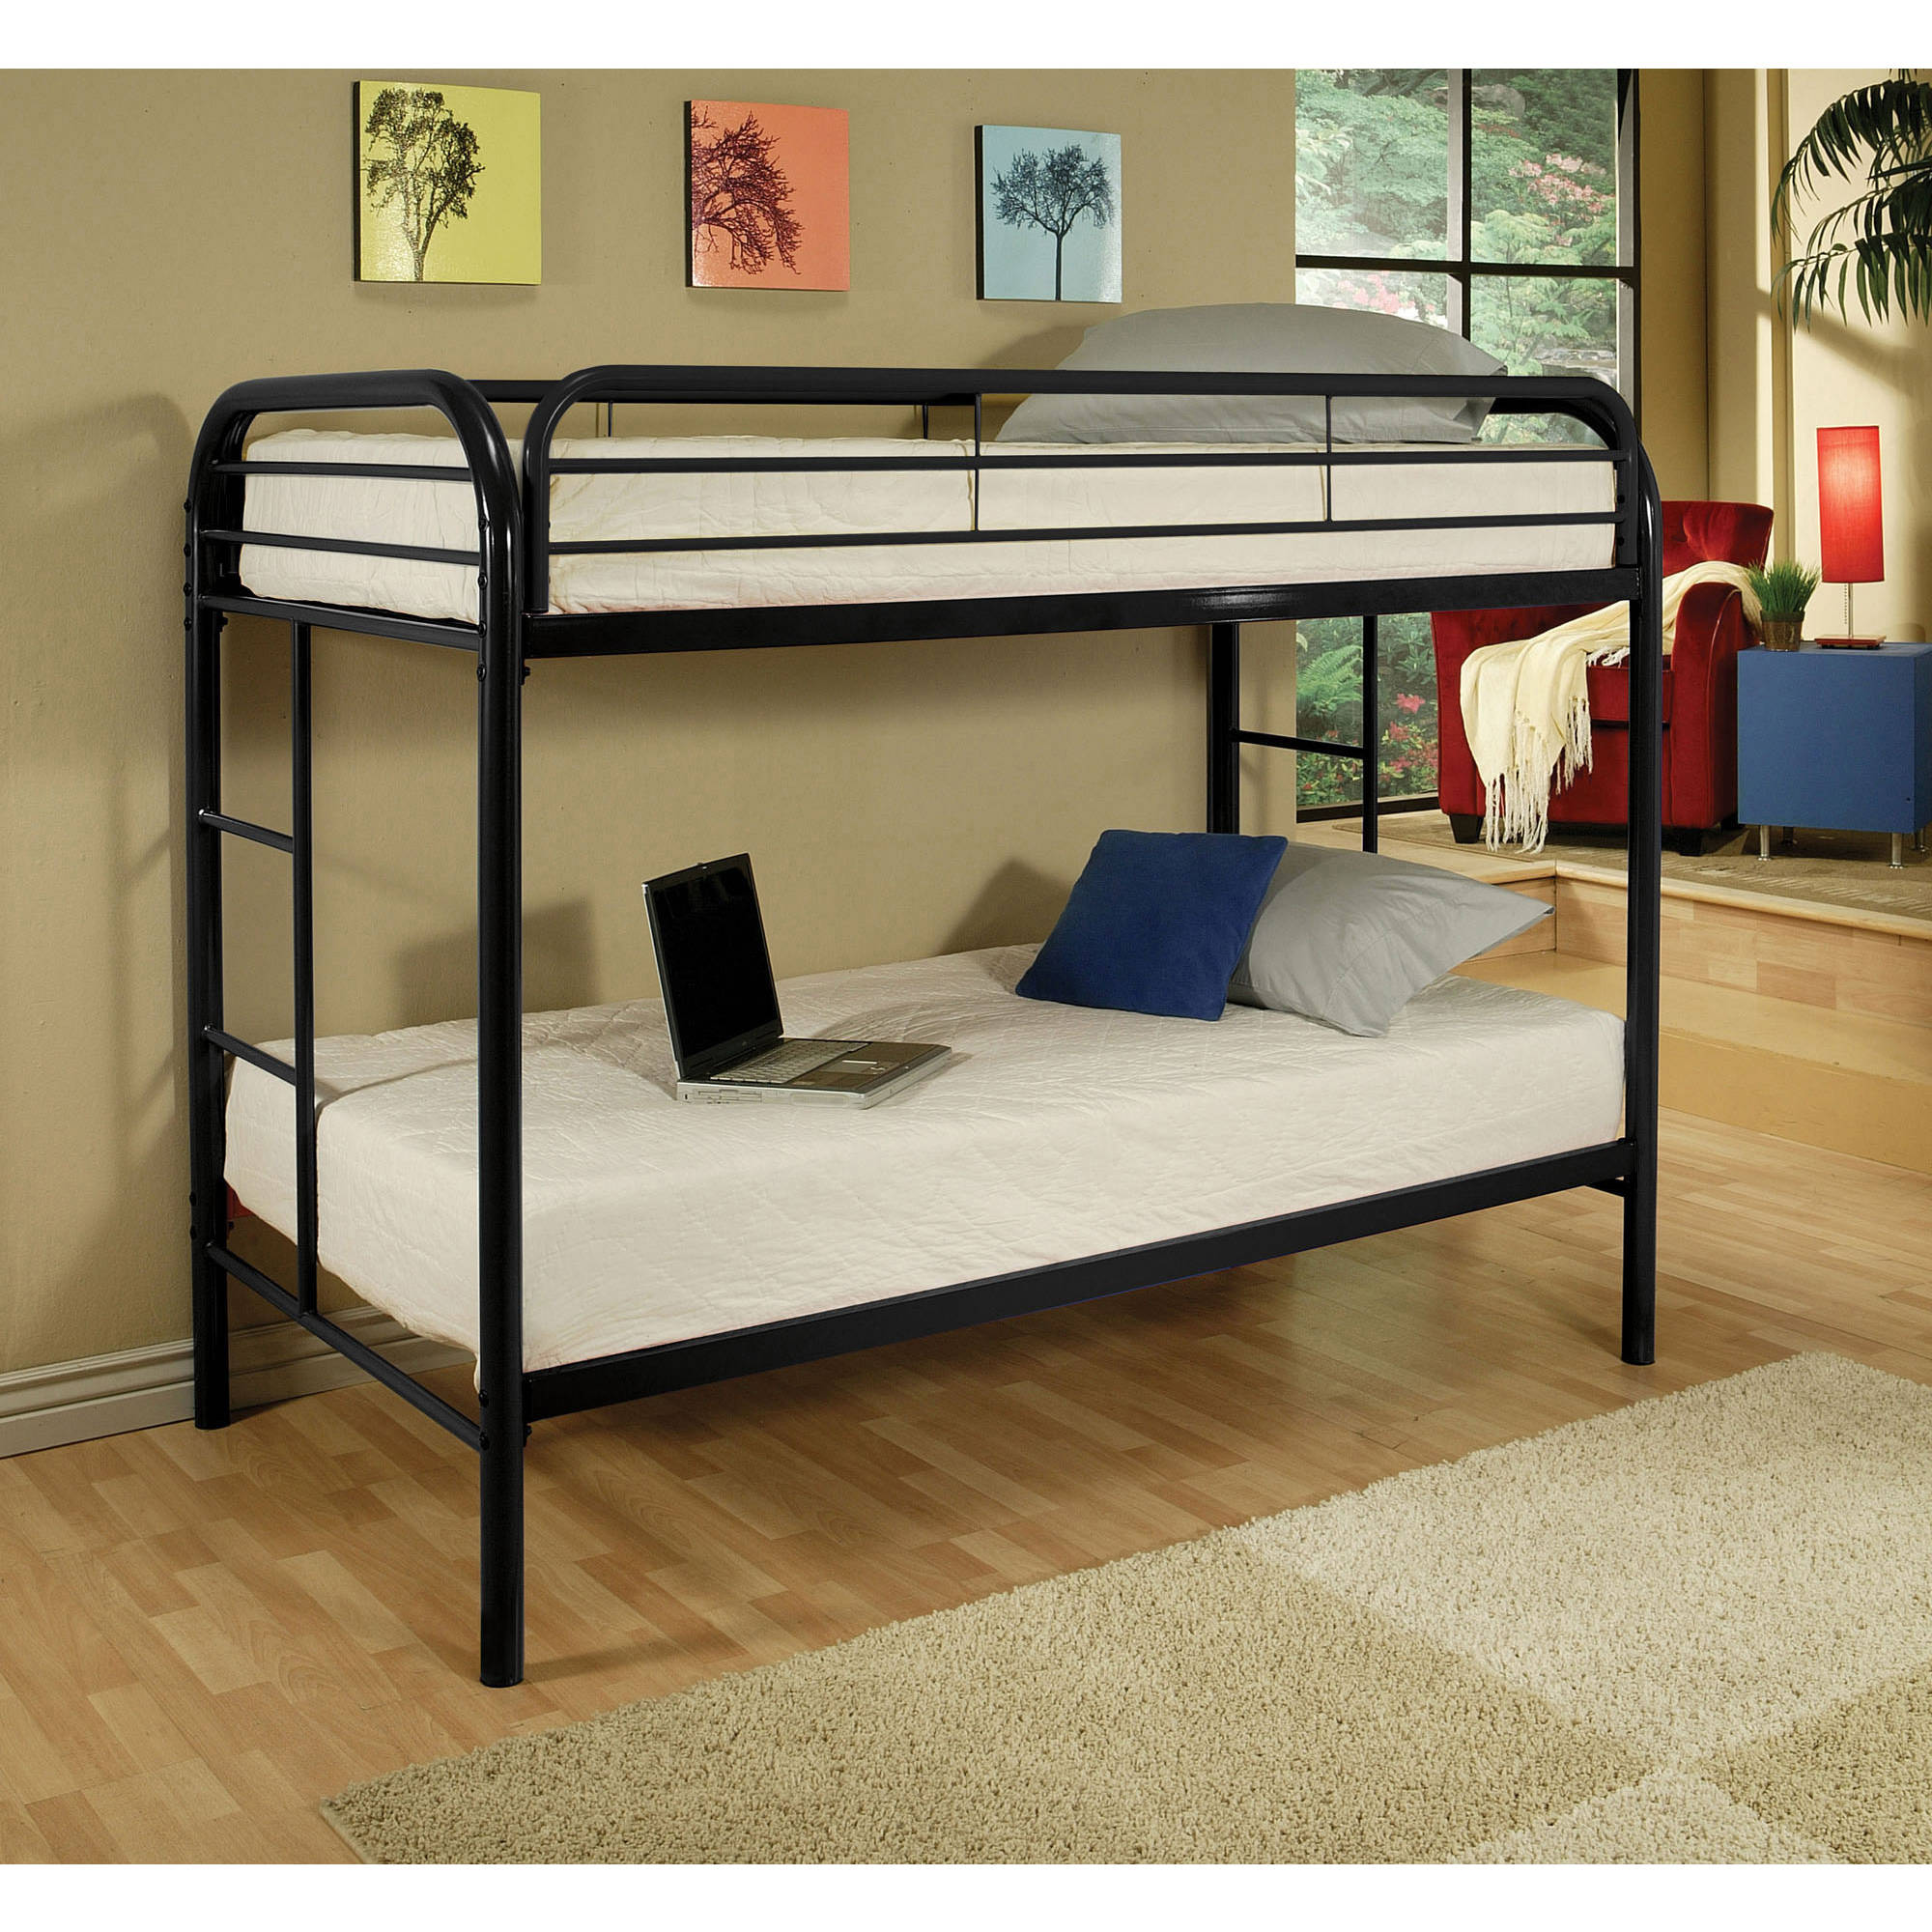 twin bunk beds with mattresses included